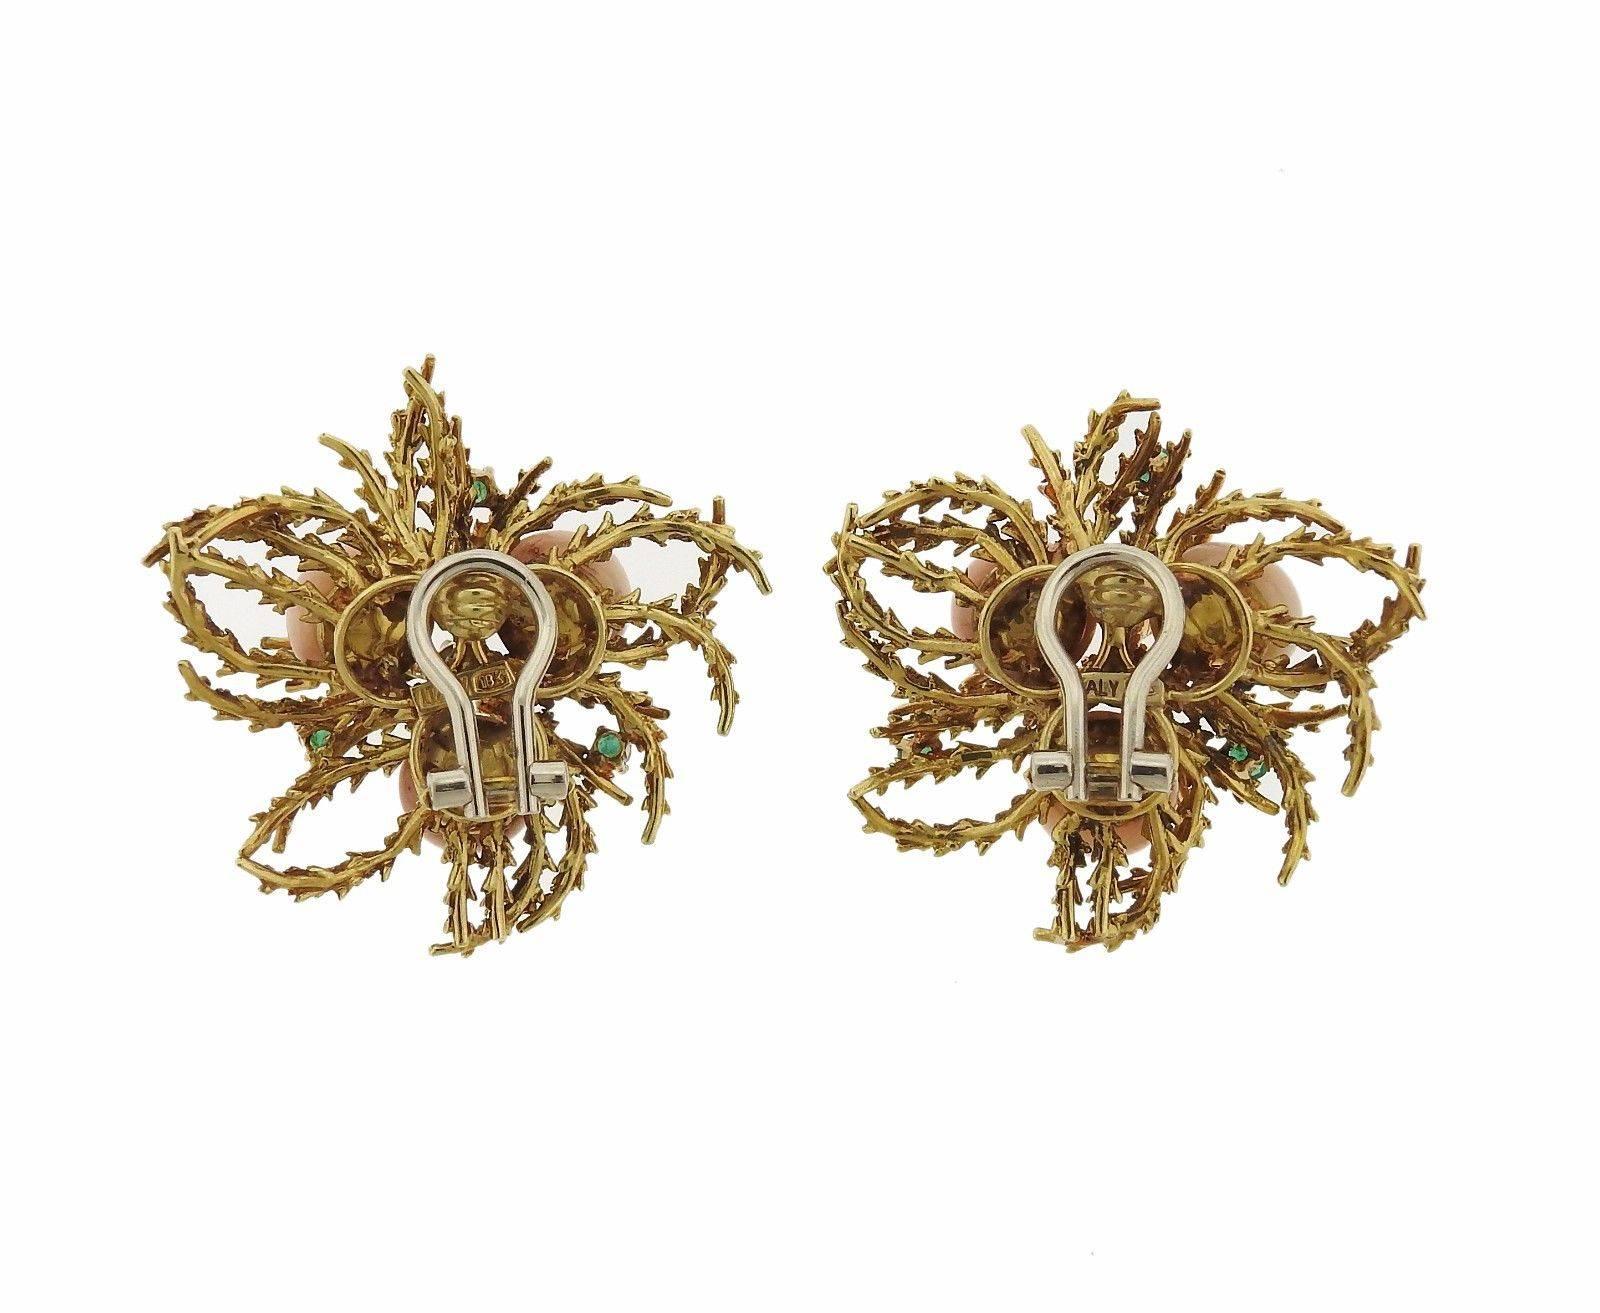 A pair of 18k yellow gold earrings set with coral emeralds and approximately 0.08ctw of H/VS-SI diamonds.  The earrings measure 35mm x 35mm and weigh 28.2 grams.  Marked: 18k, Italy.